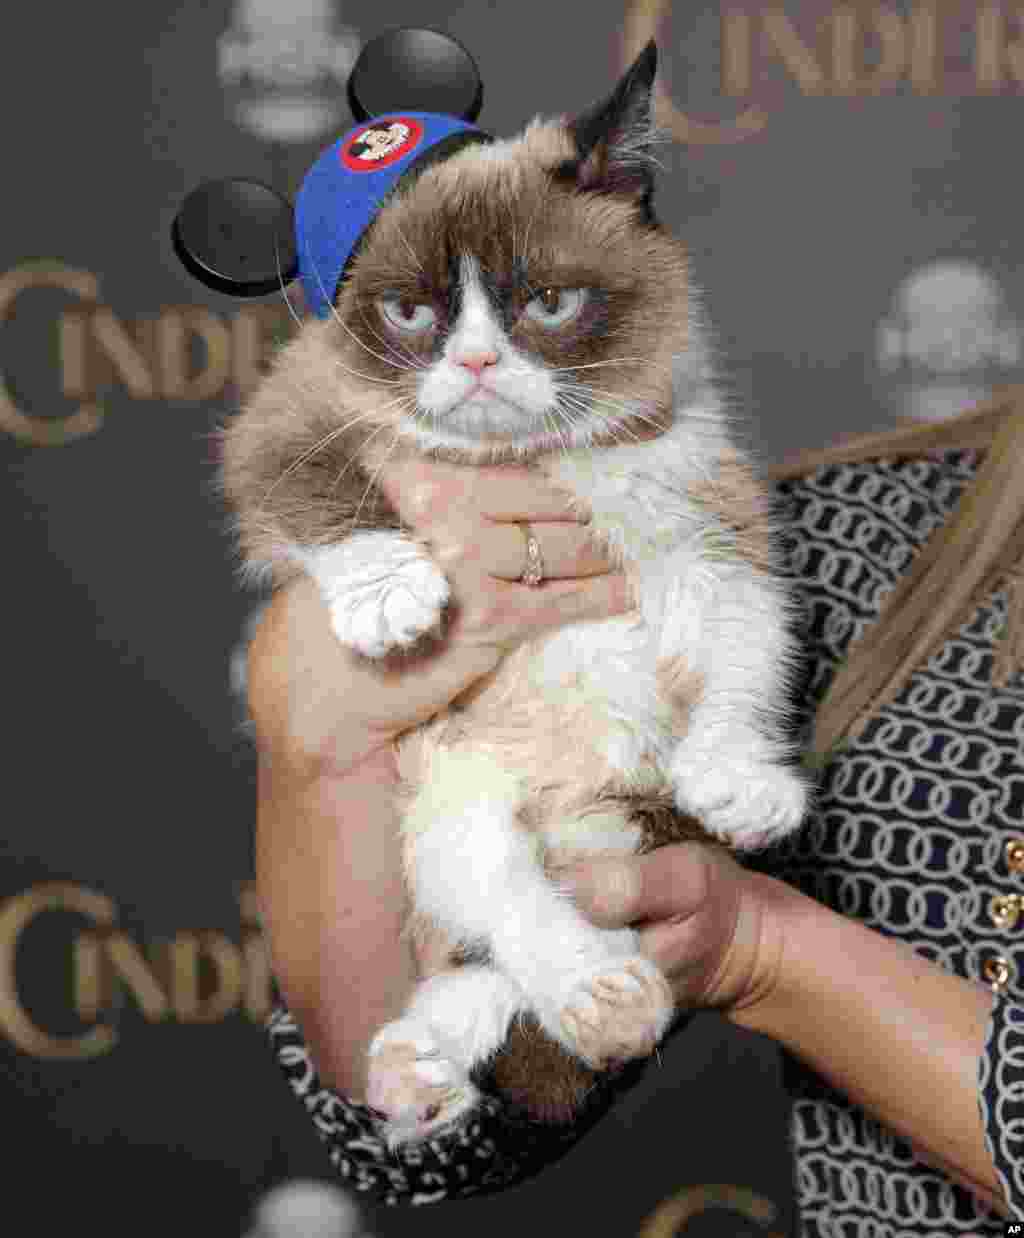 Grumpy Cat attends the World Premiere of Cinderella in Los Angeles, California, March 1, 2015.